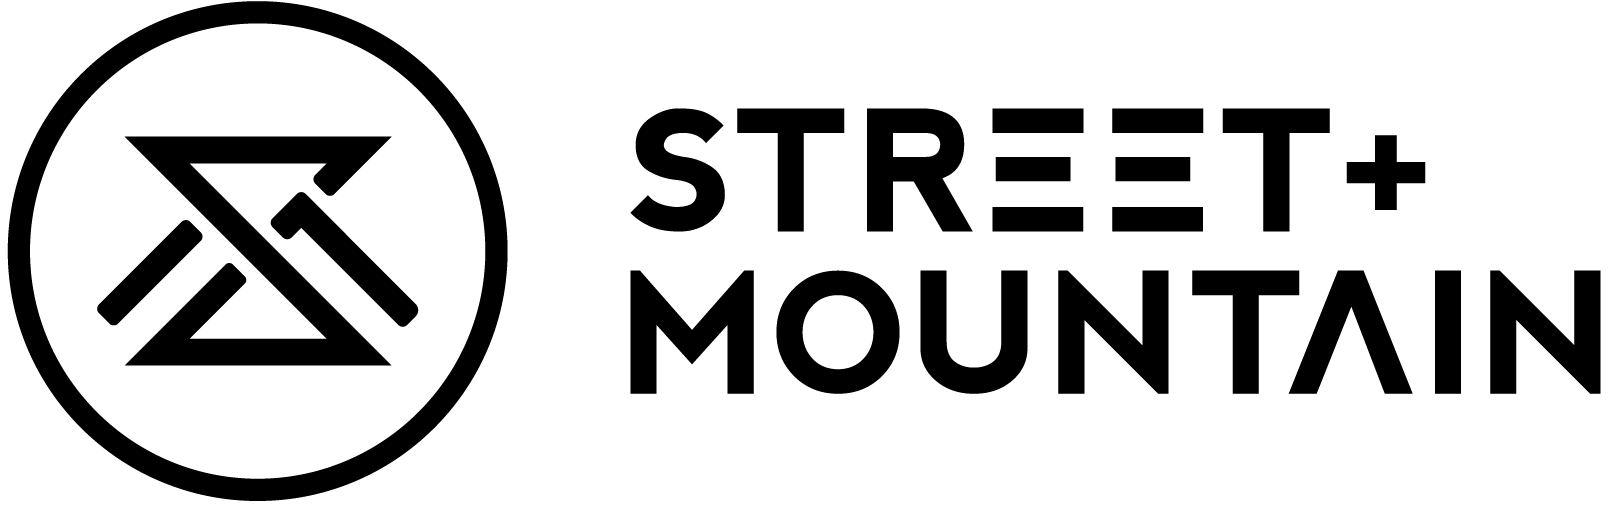 Street Mountain Logo - Street and Mountain Different Board Hike Culture